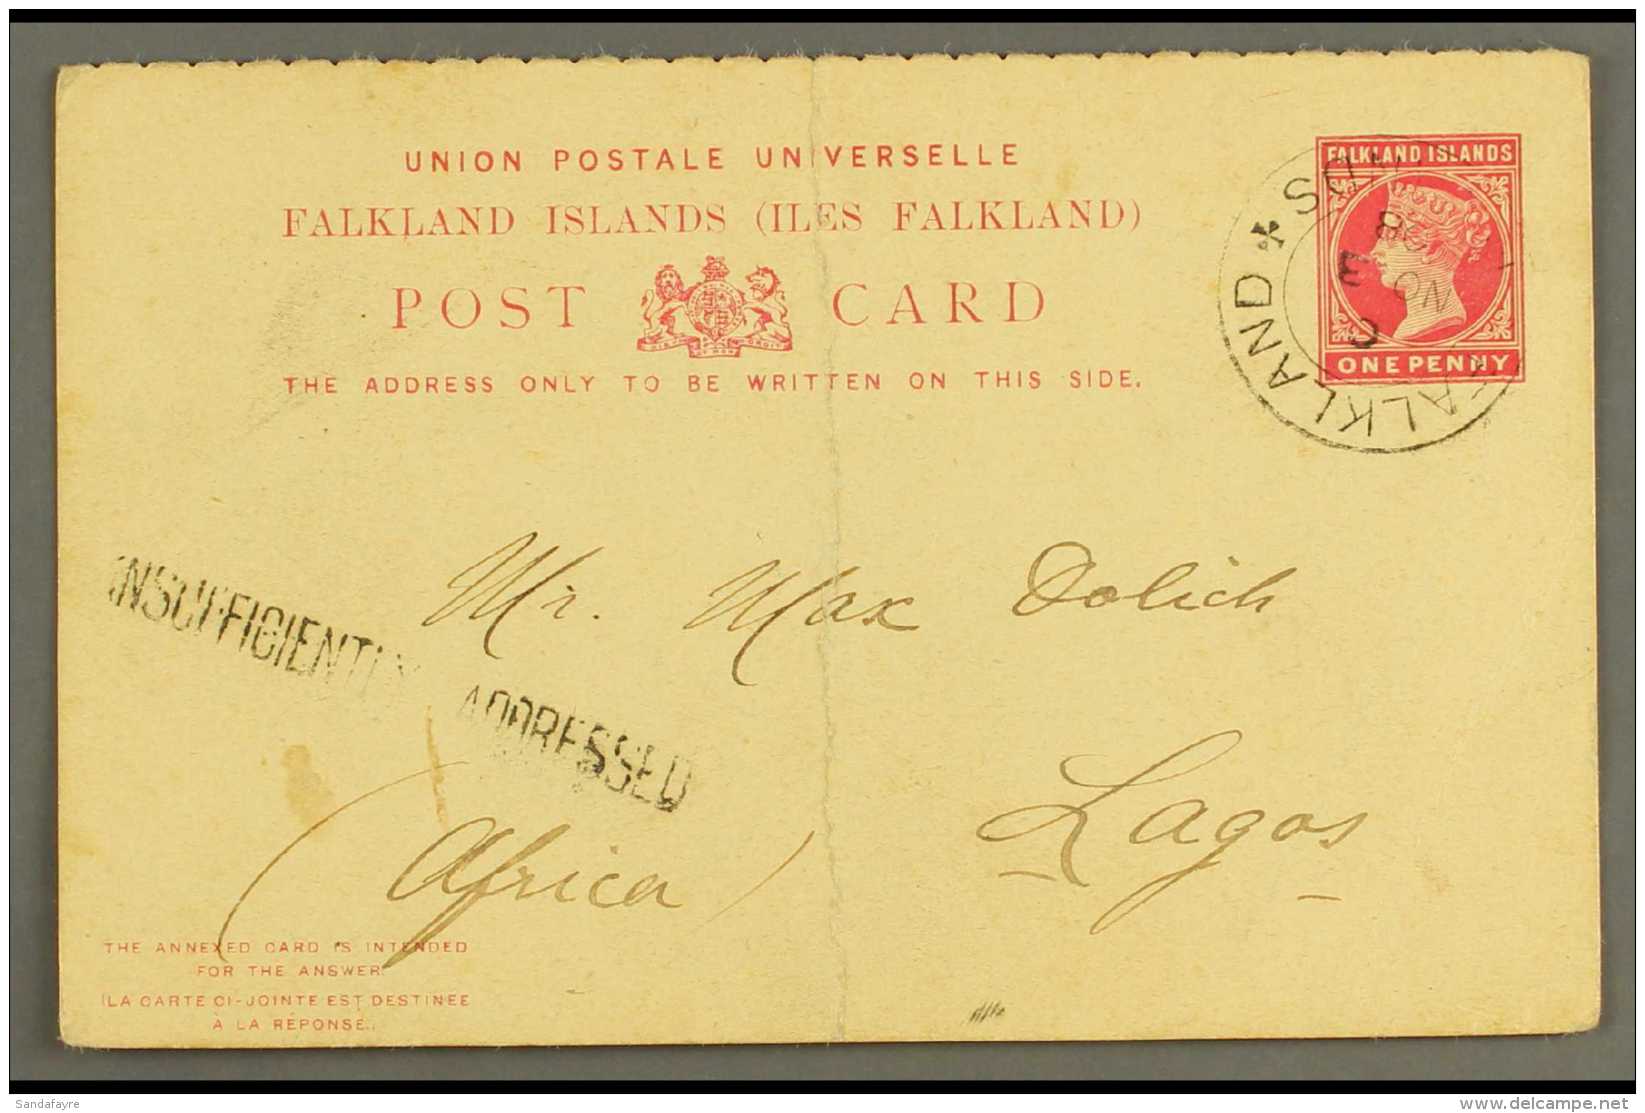 LAGOS Outward Portion Of 1d Reply Card Sent From The Falkland Is To Lagos (Africa) And Drawing An "Insufficiently... - Nigeria (...-1960)